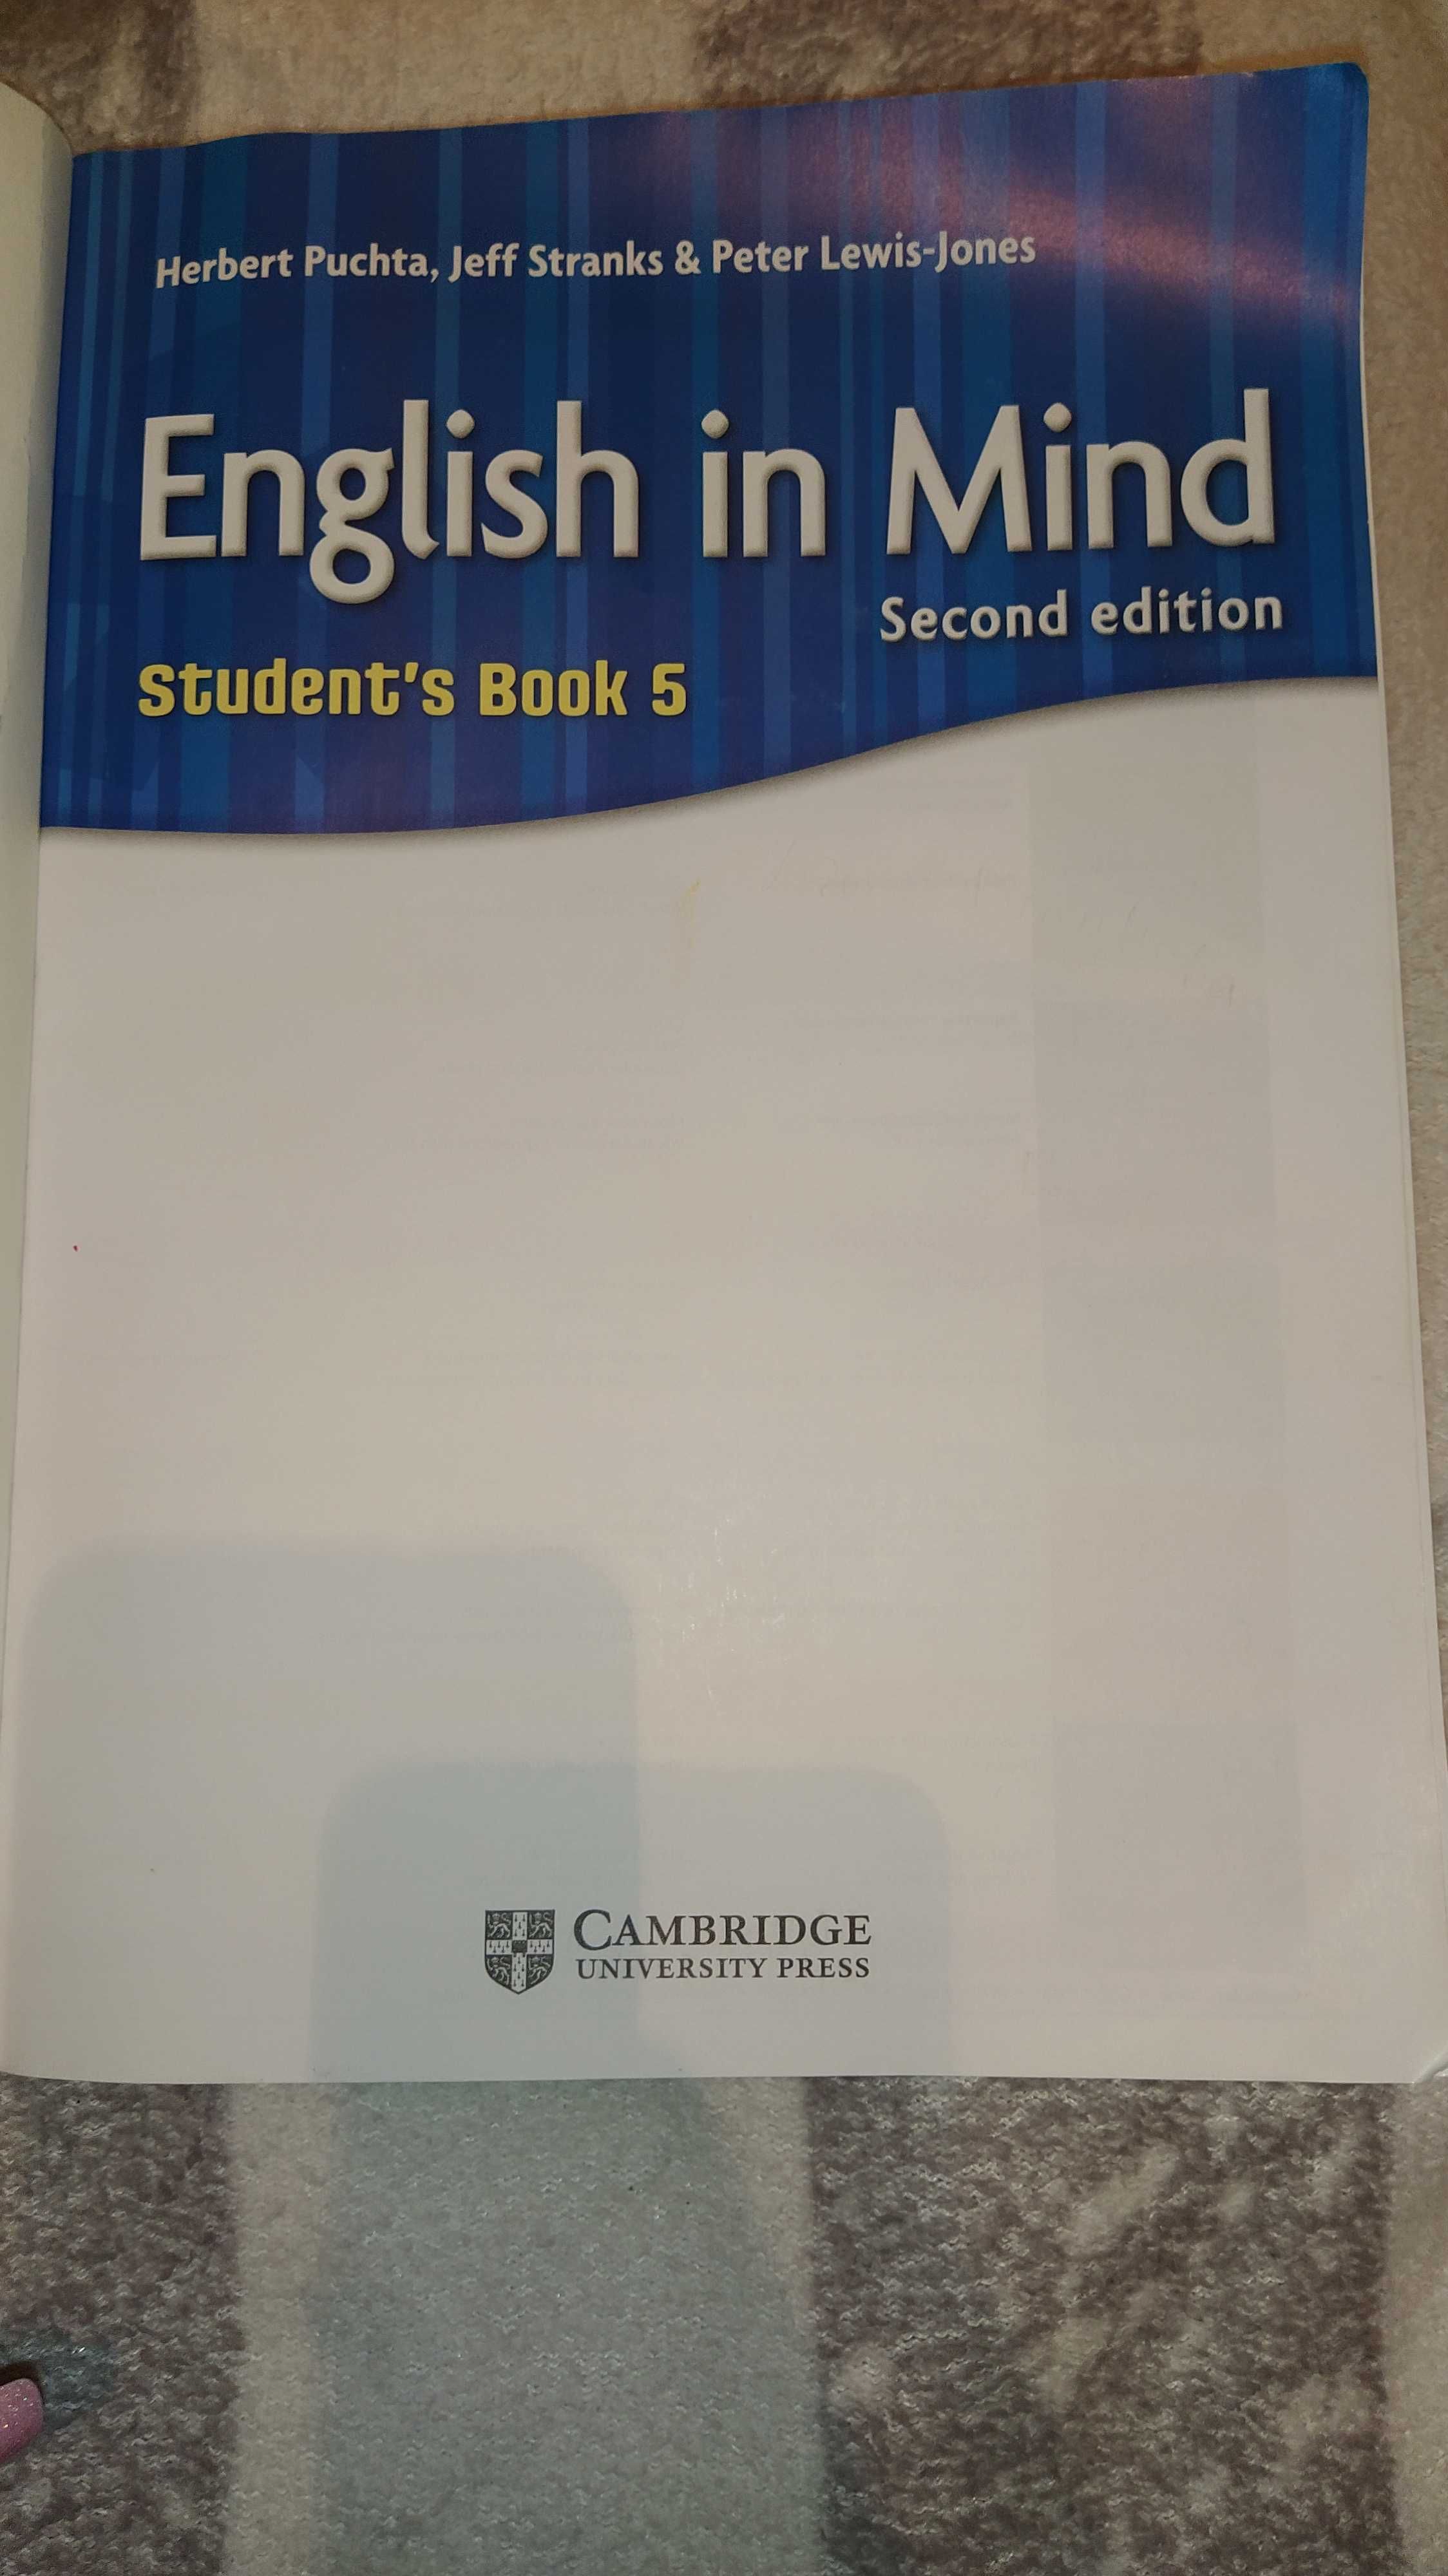 English in Mind Second edition Student's Book 5